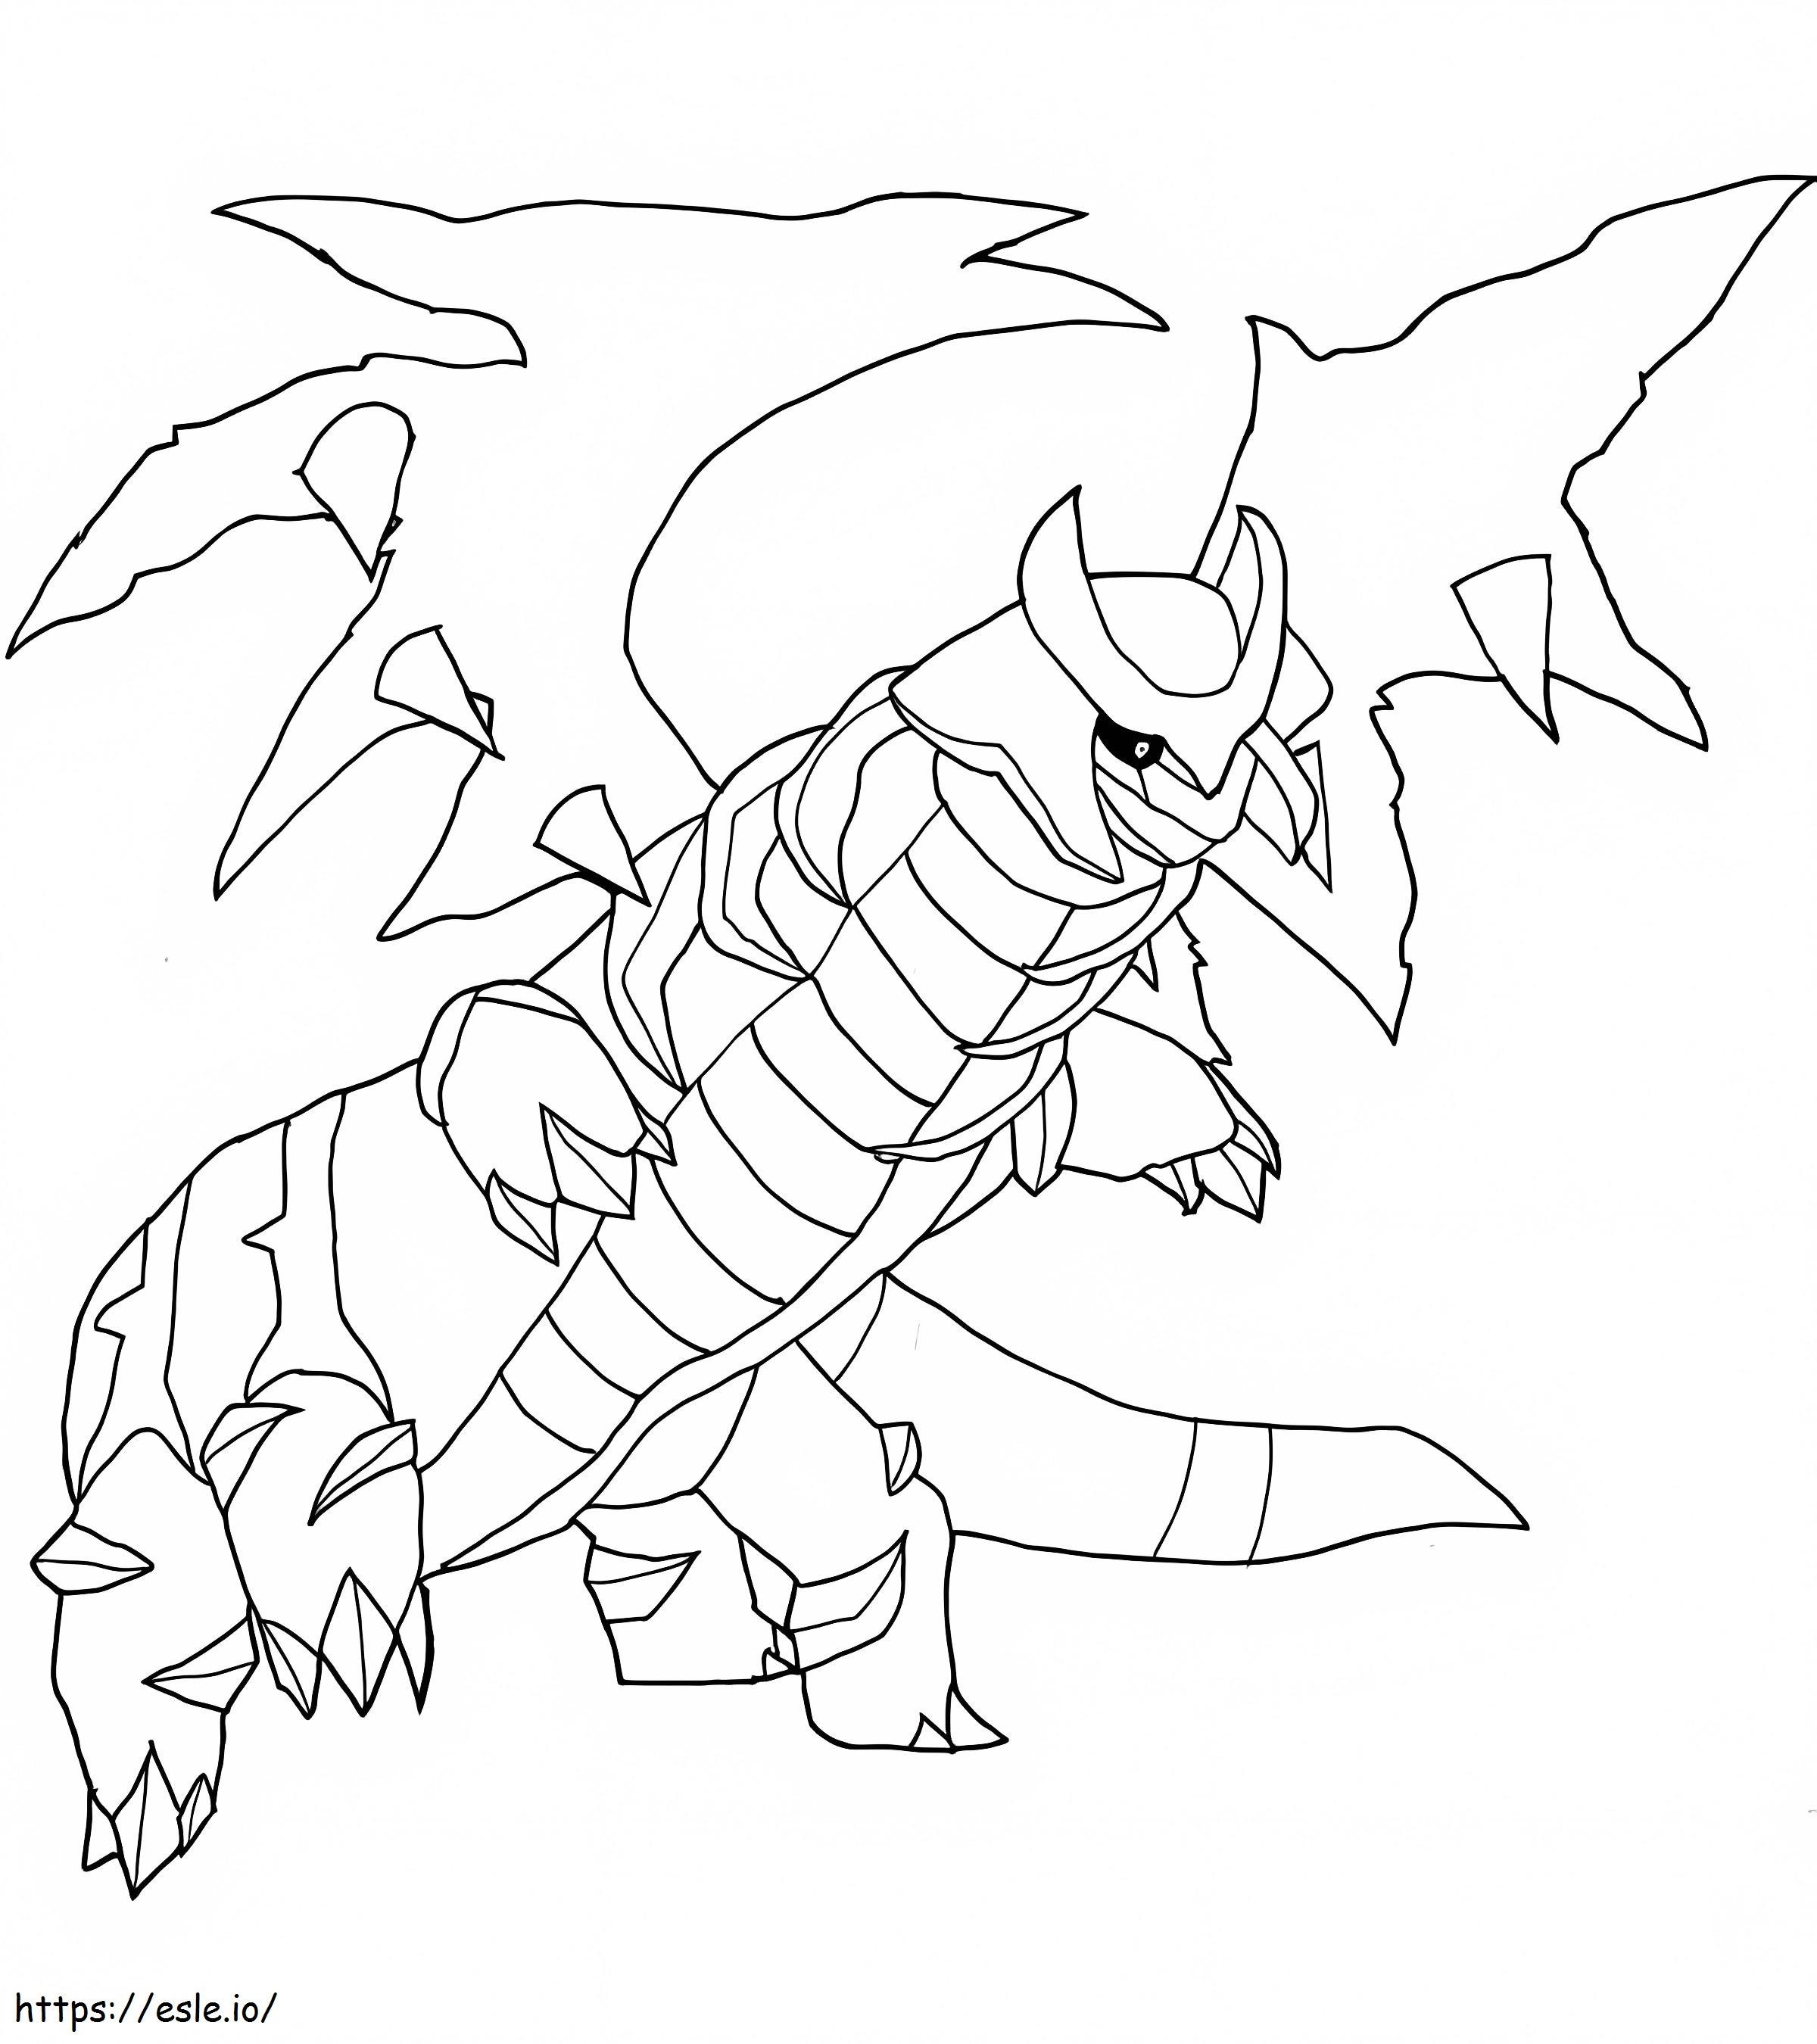 Giratina In Altered Form coloring page